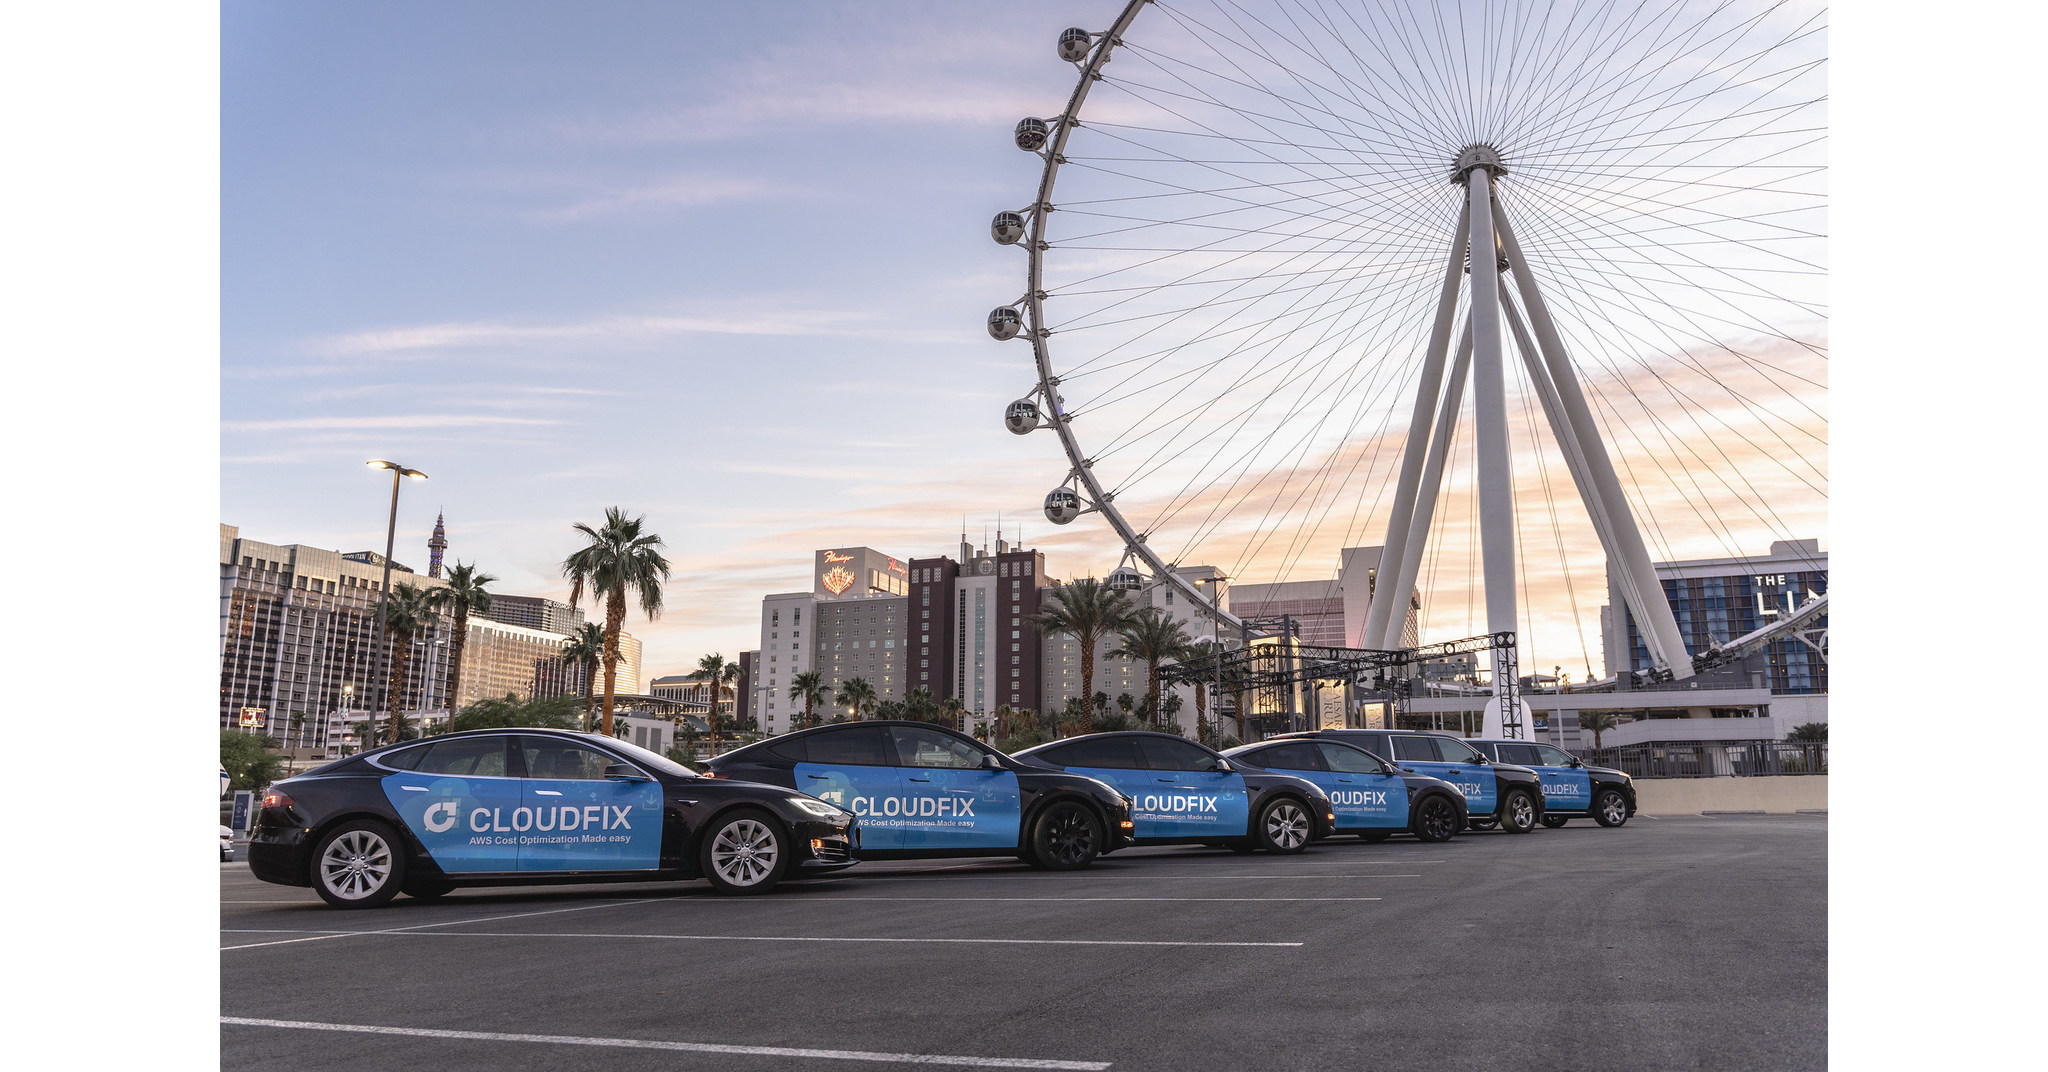 POP-UP RIDESHARE LAUNCHES IN LAS VEGAS AS INNOVATIVE TRANSPORTATION OPTION FOR LARGE-SCALE EVENT, CONVENTION ATTENDEES